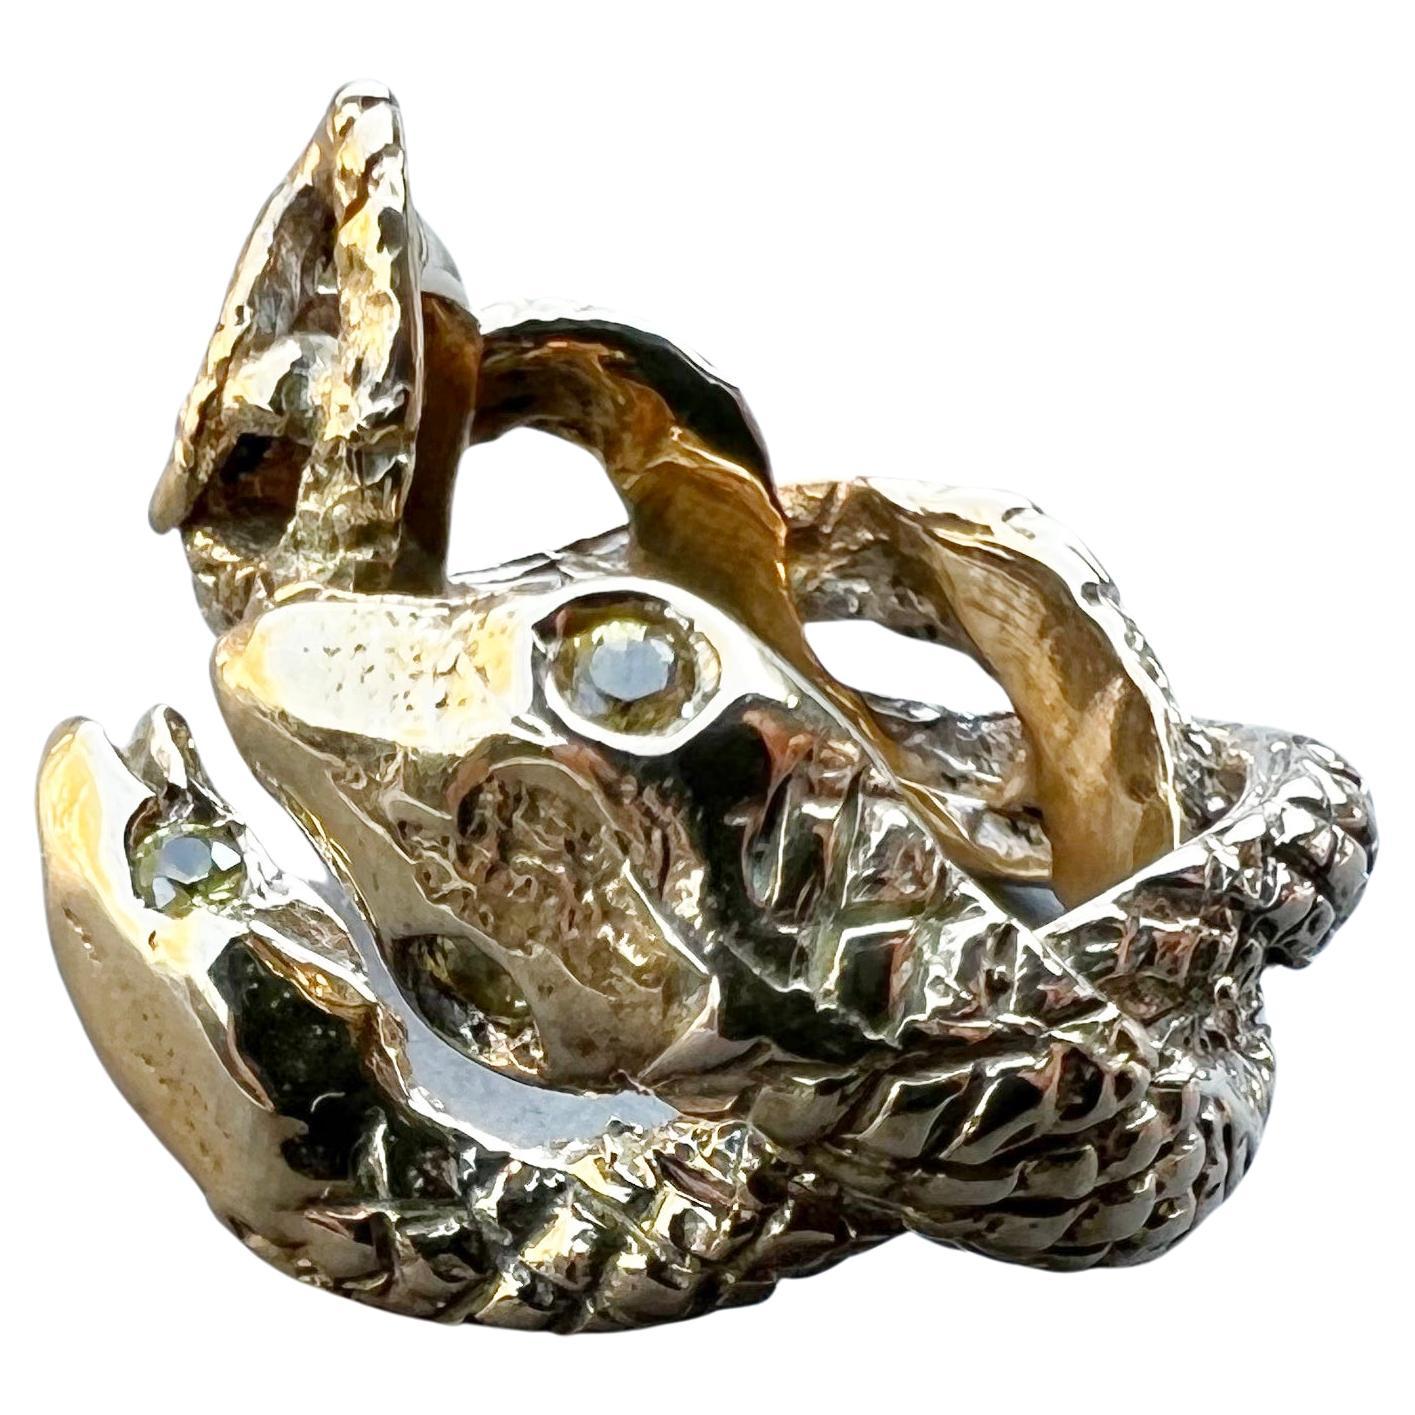 Animal jewelry Snake Ring with 4 Yellow Sapphires made in Bronze Cocktail Ring J Dauphin

This ring is adjustable - fits size 6-8

J DAUPHIN 